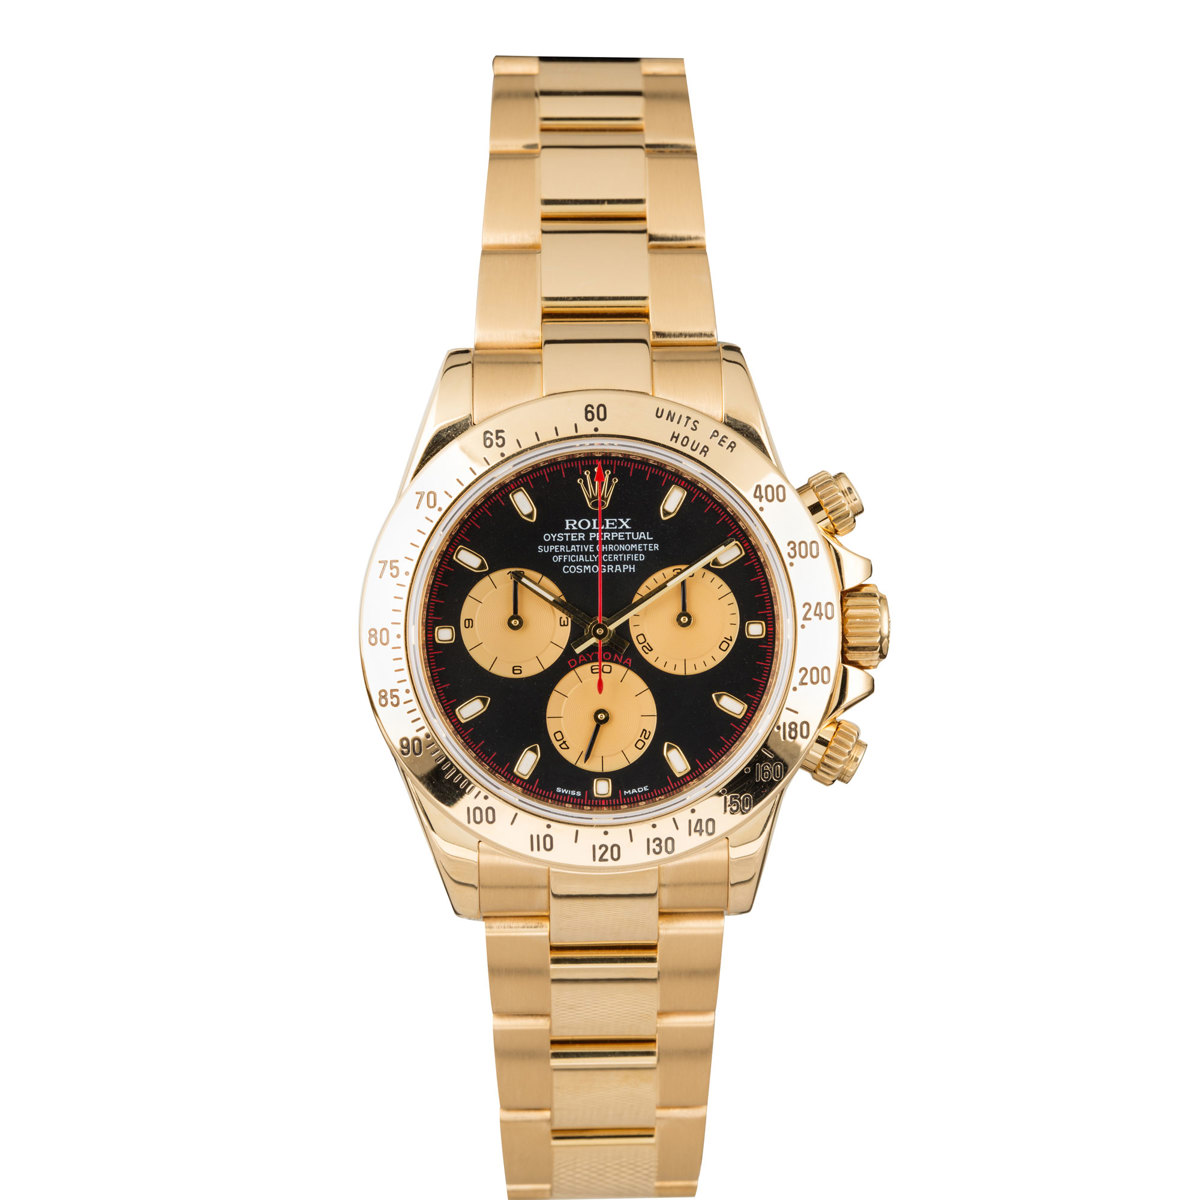 Rolex Daytona Ref 116528 A Yellow Gold Chronograph Wristwatch with Bracelet Circa 2001 offered by Sotheby's